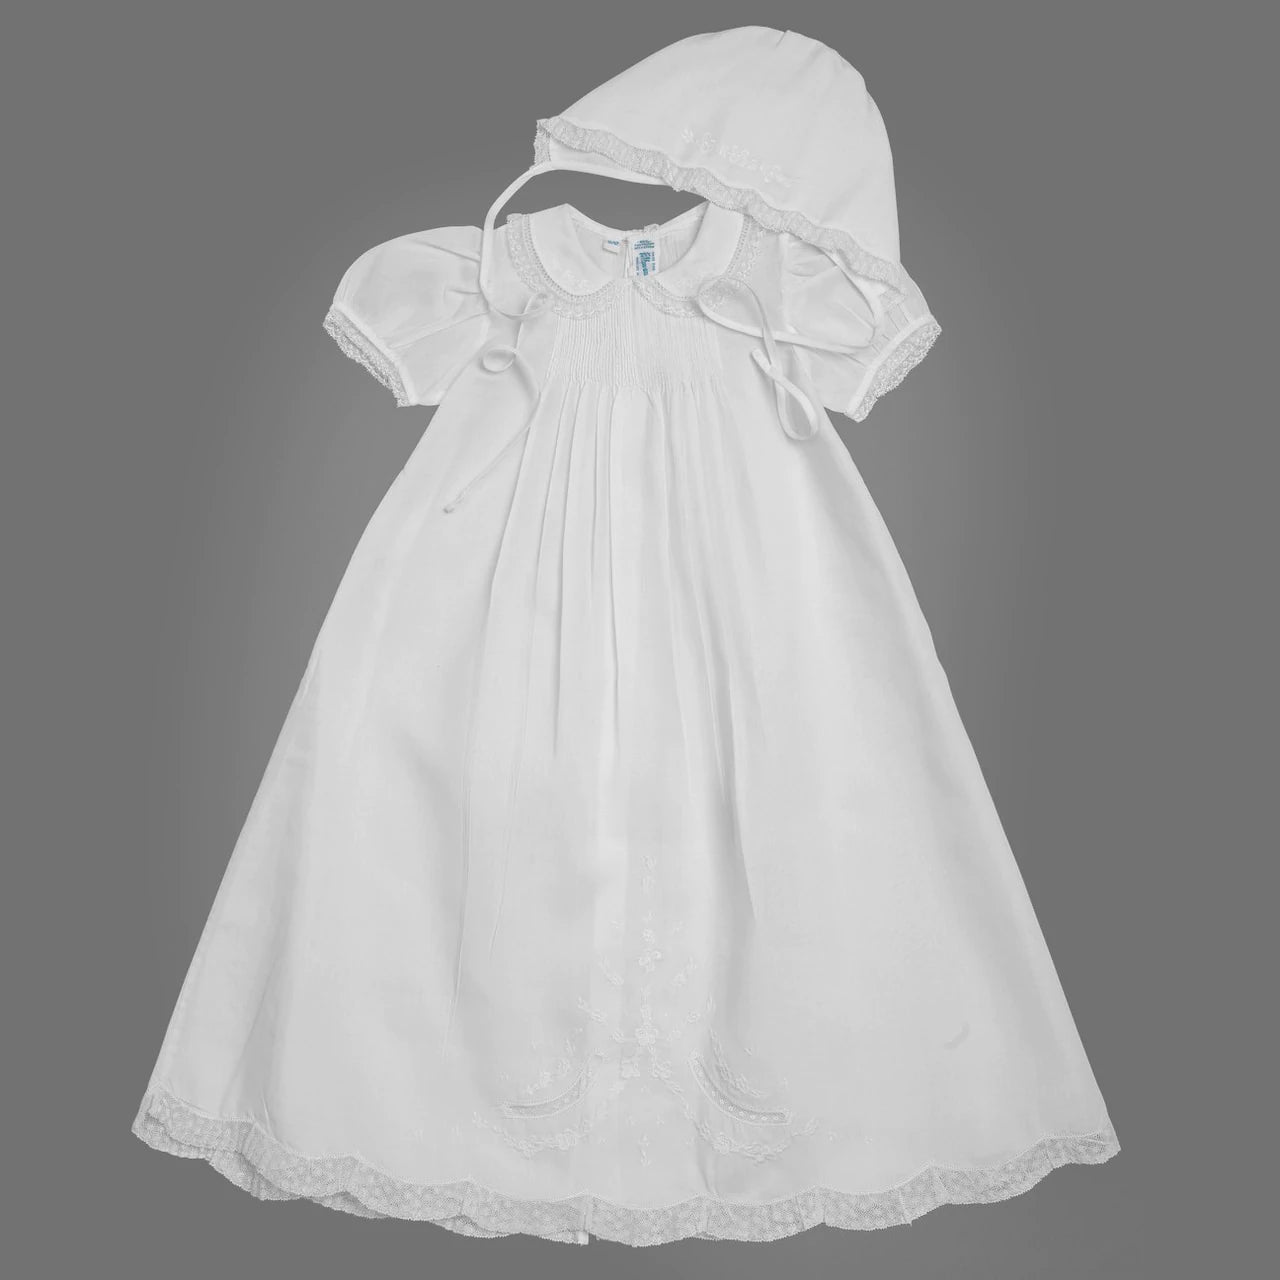 Ruffle Lace Collar Special Occasion Set  - Doodlebug's Children's Boutique